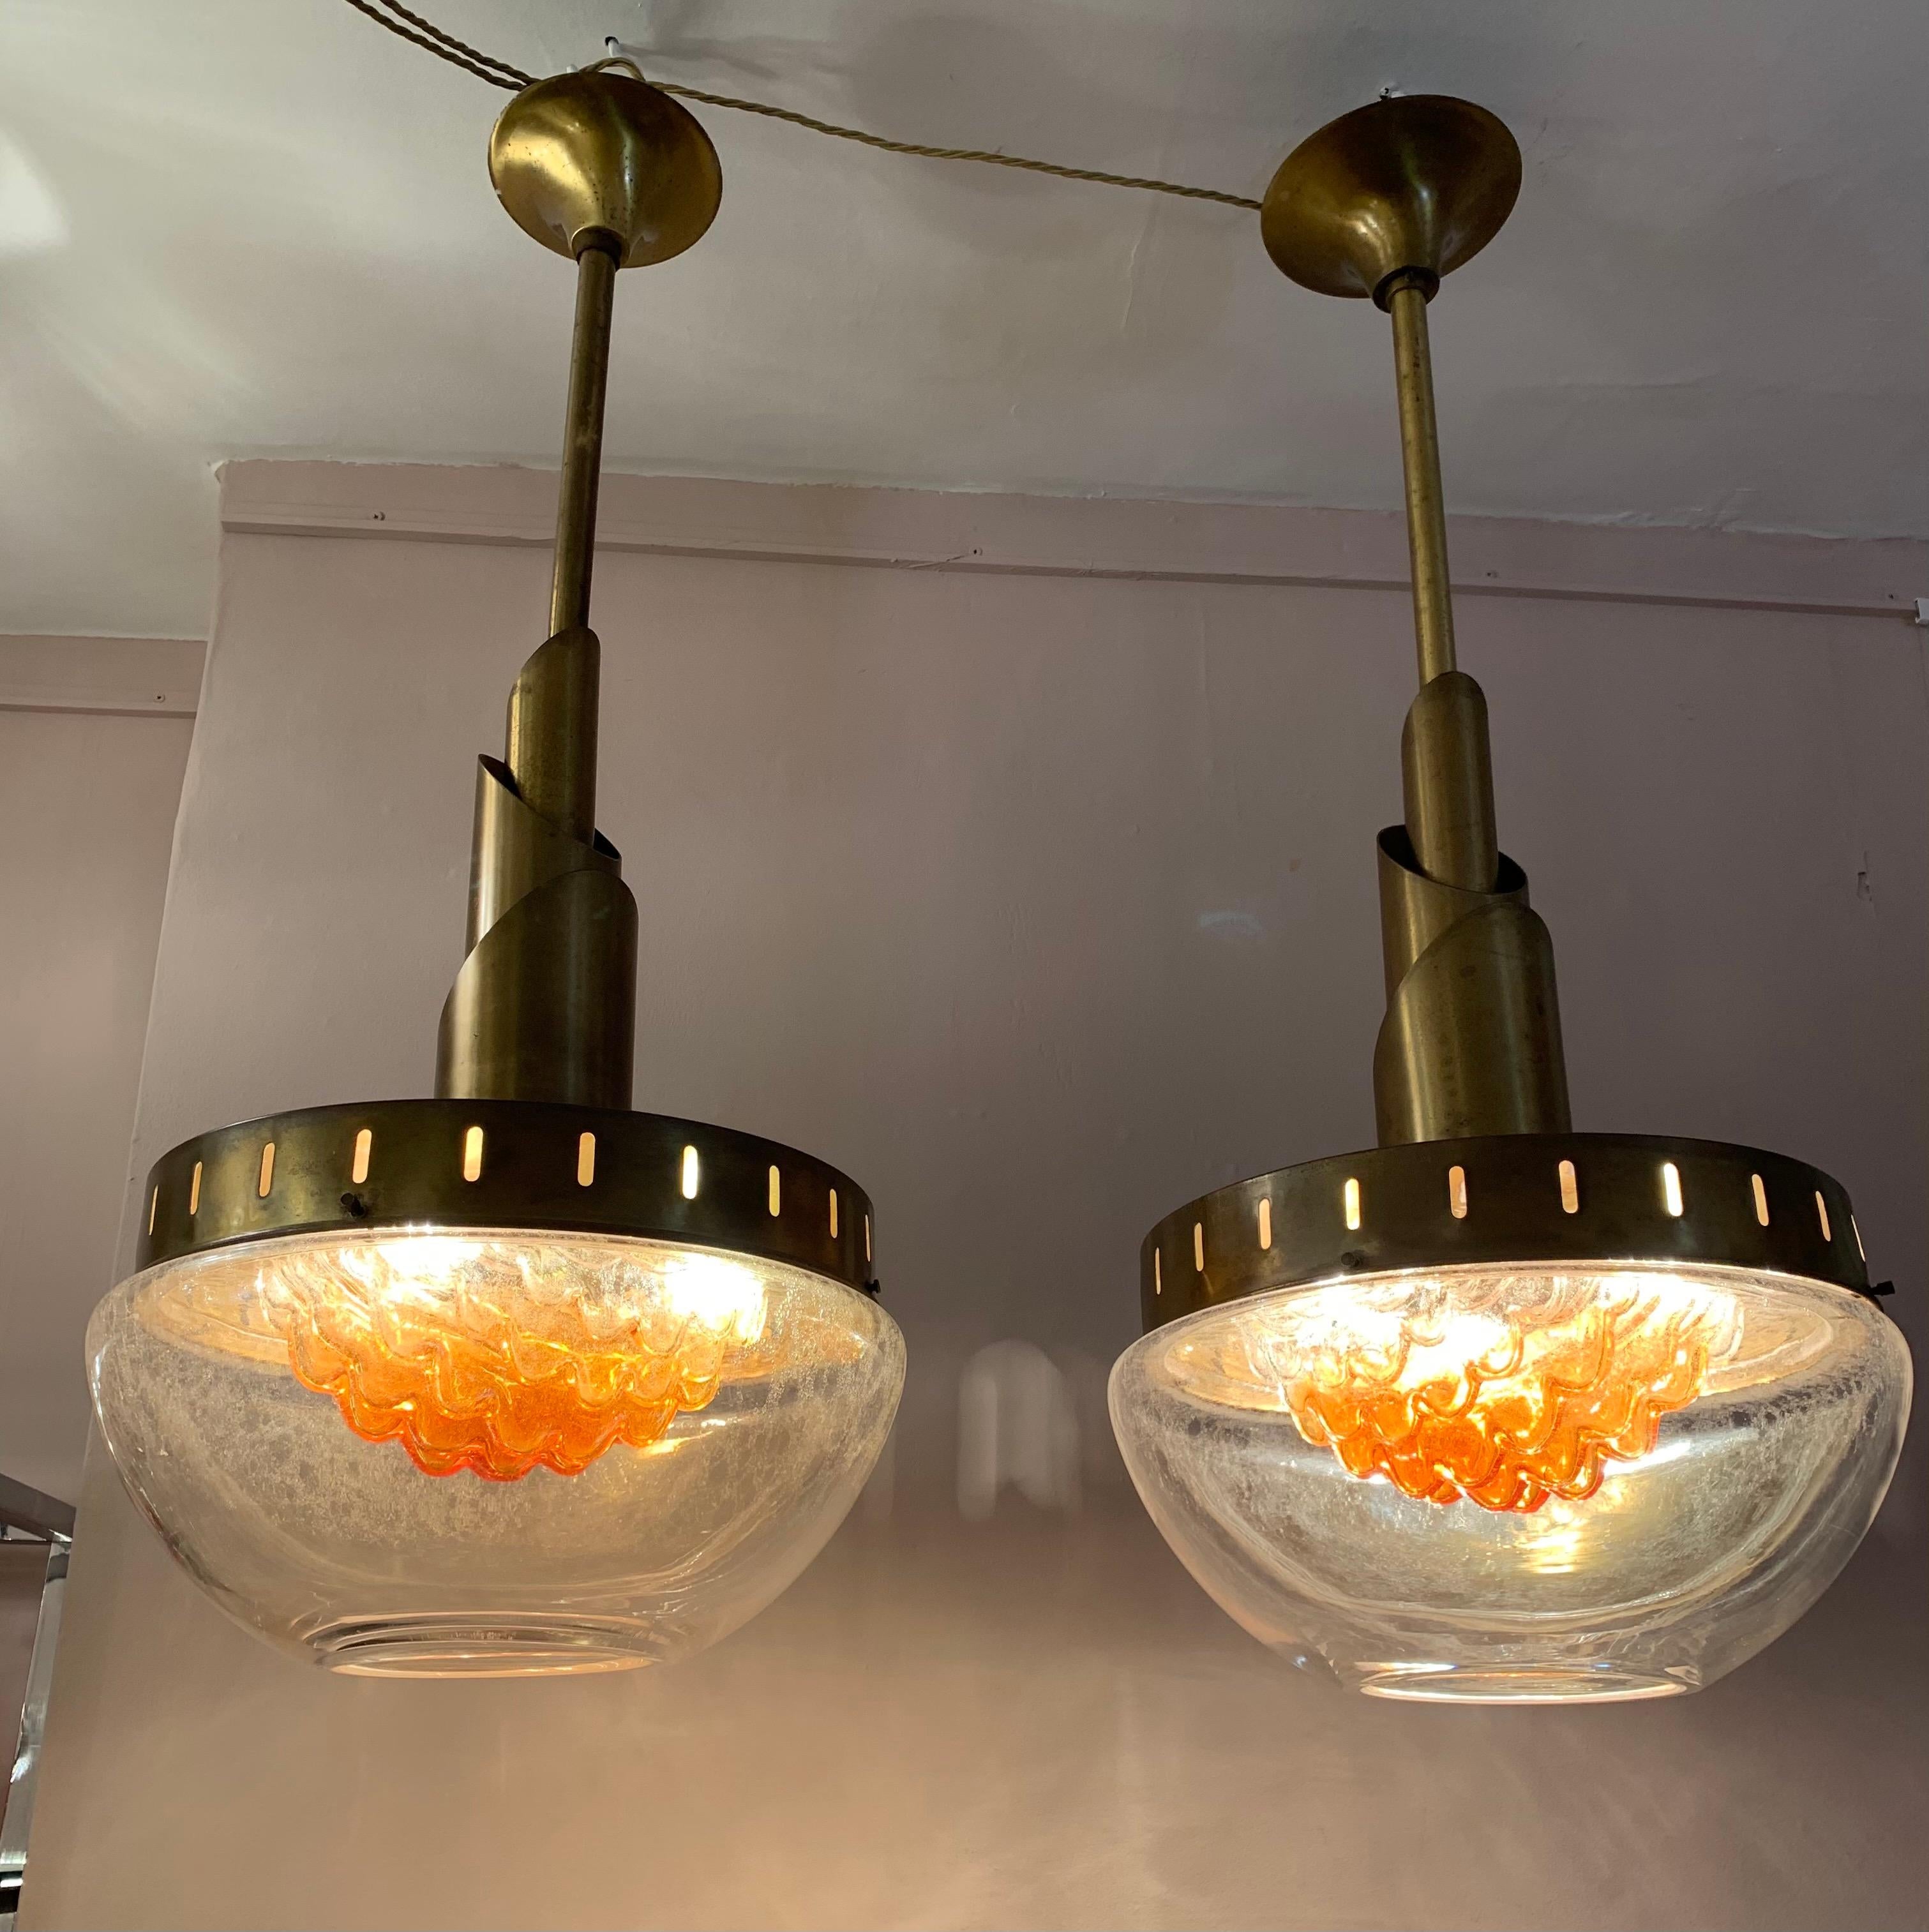 Stunning pair of rare large 1960s Murano glass hanging pendant lights manufactured by Mazzega. Designed by Carlo Nason. The lights are formed to resemble upturned torches with the glass simulating the flames from a lit torch. The patina of the brass